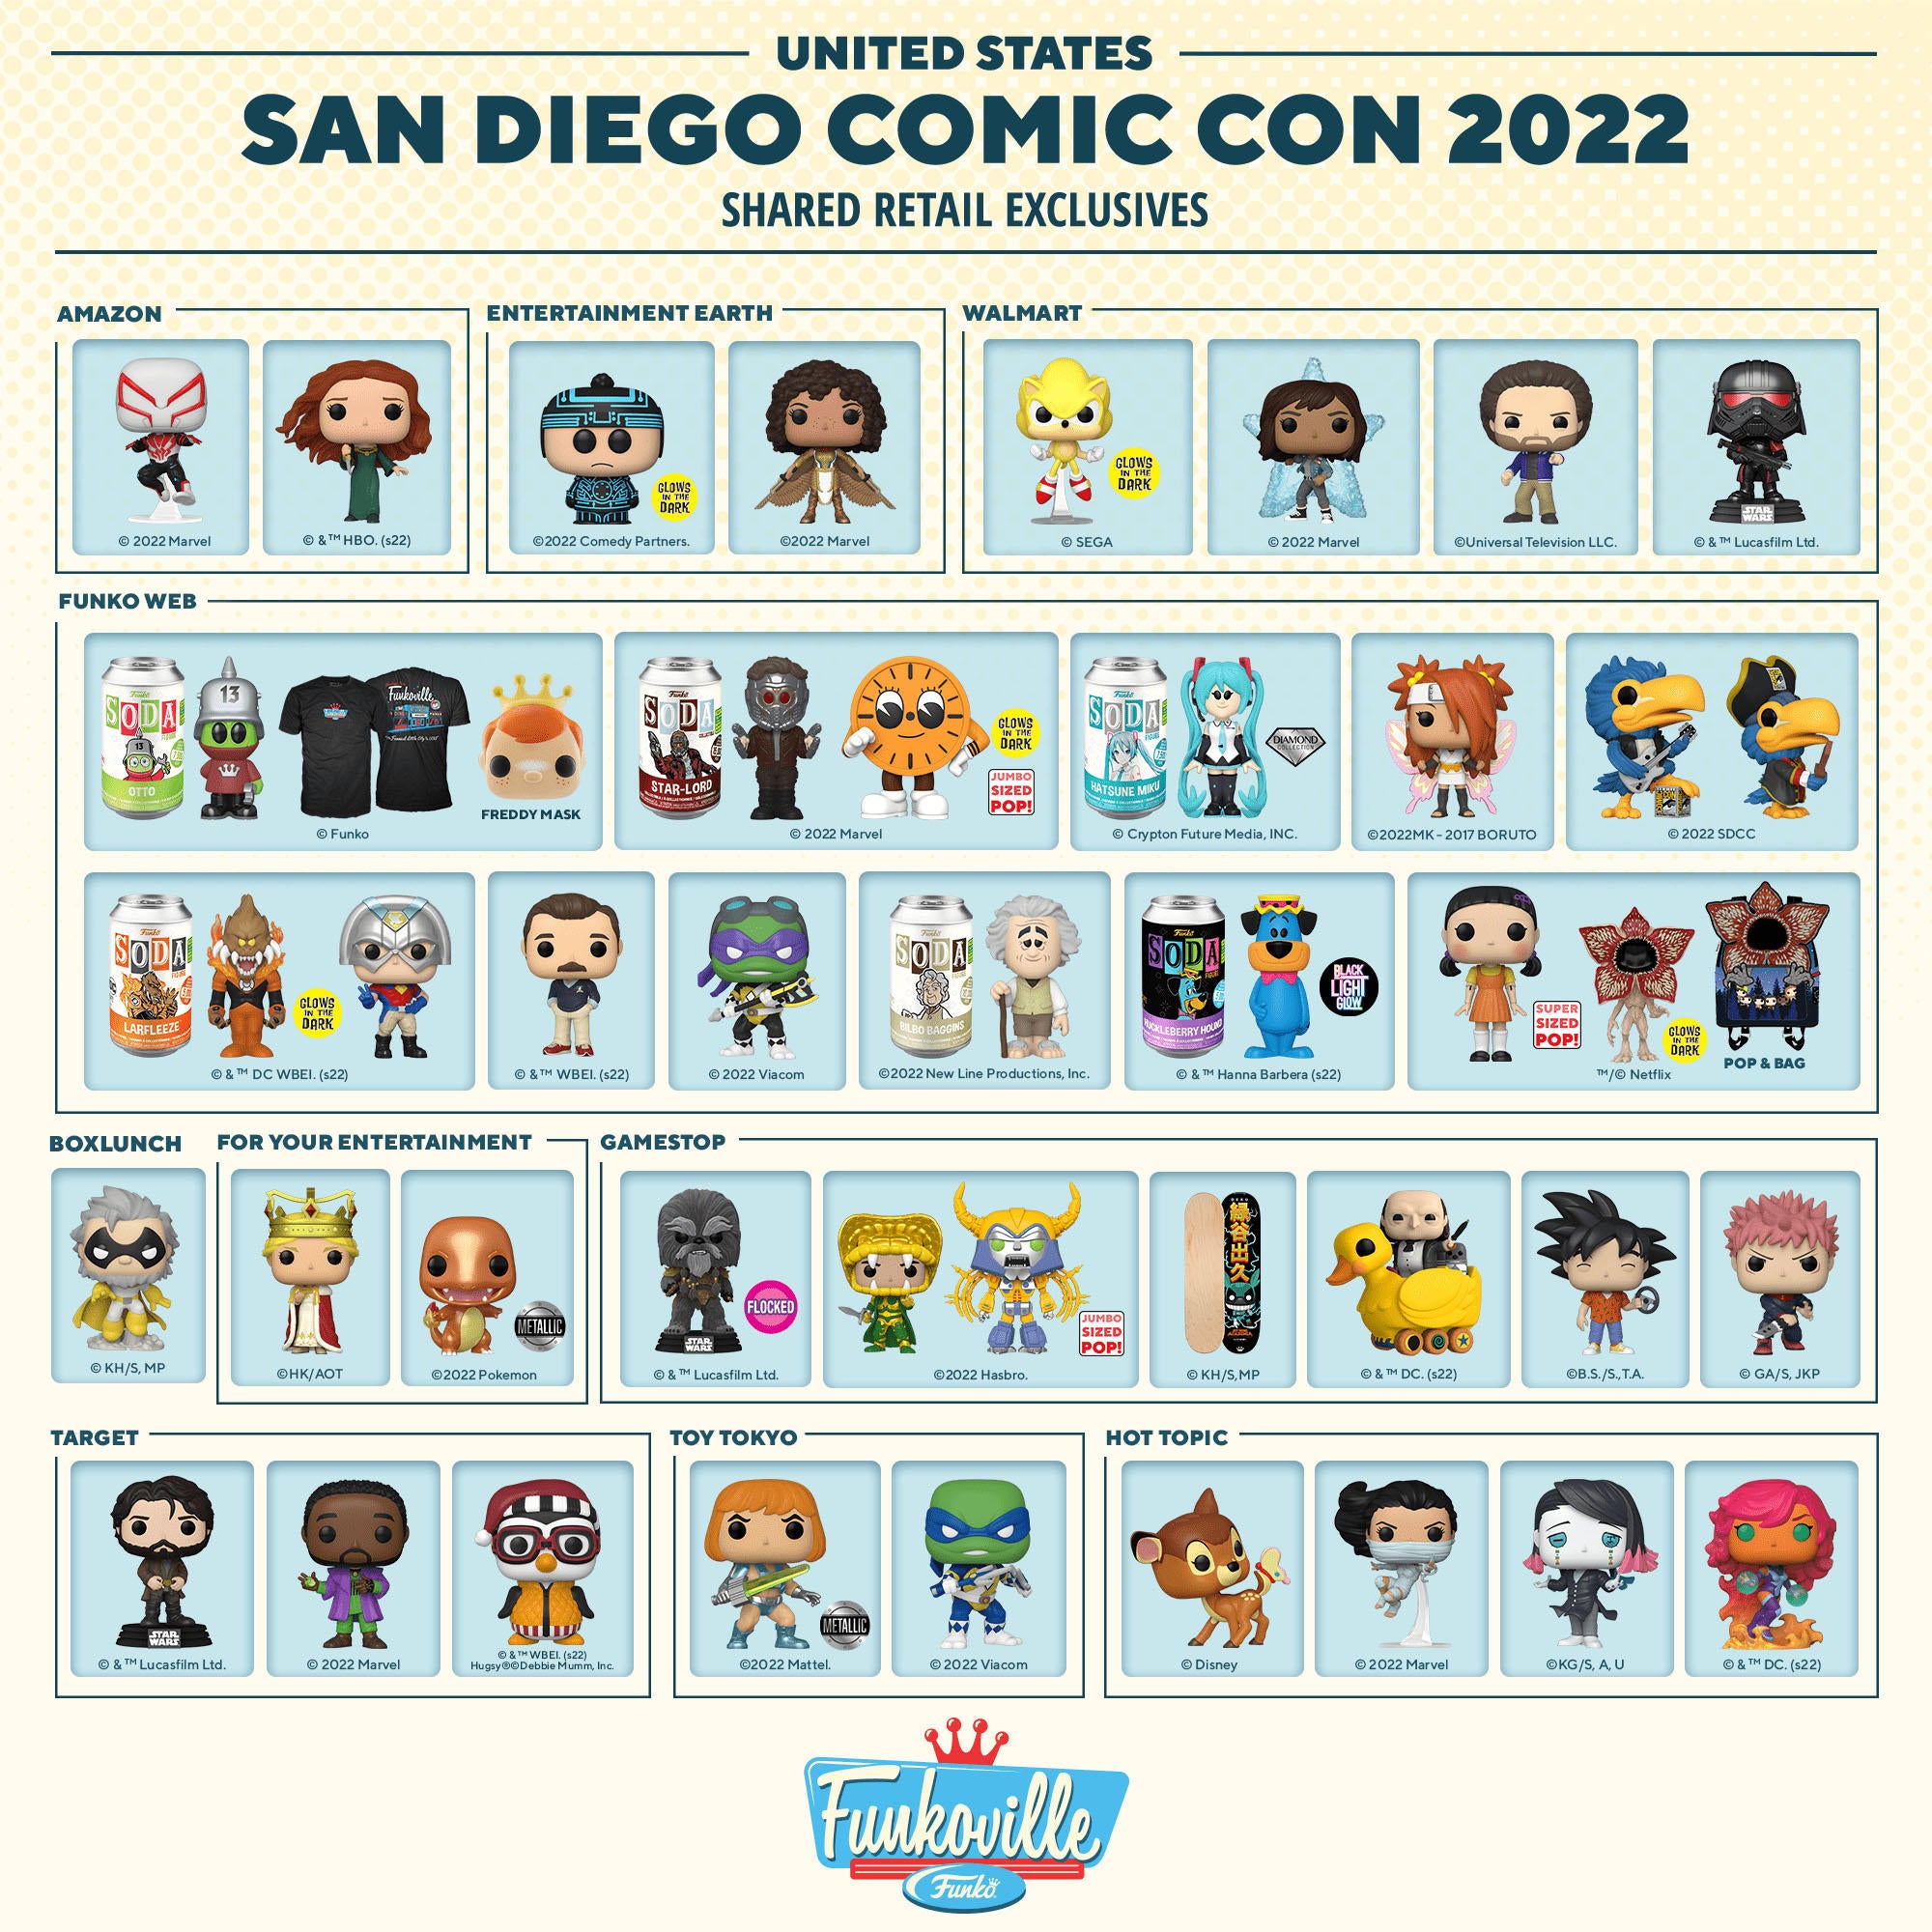 funko-sdcc-2022-pop-figure-shared-exclusives.jpg